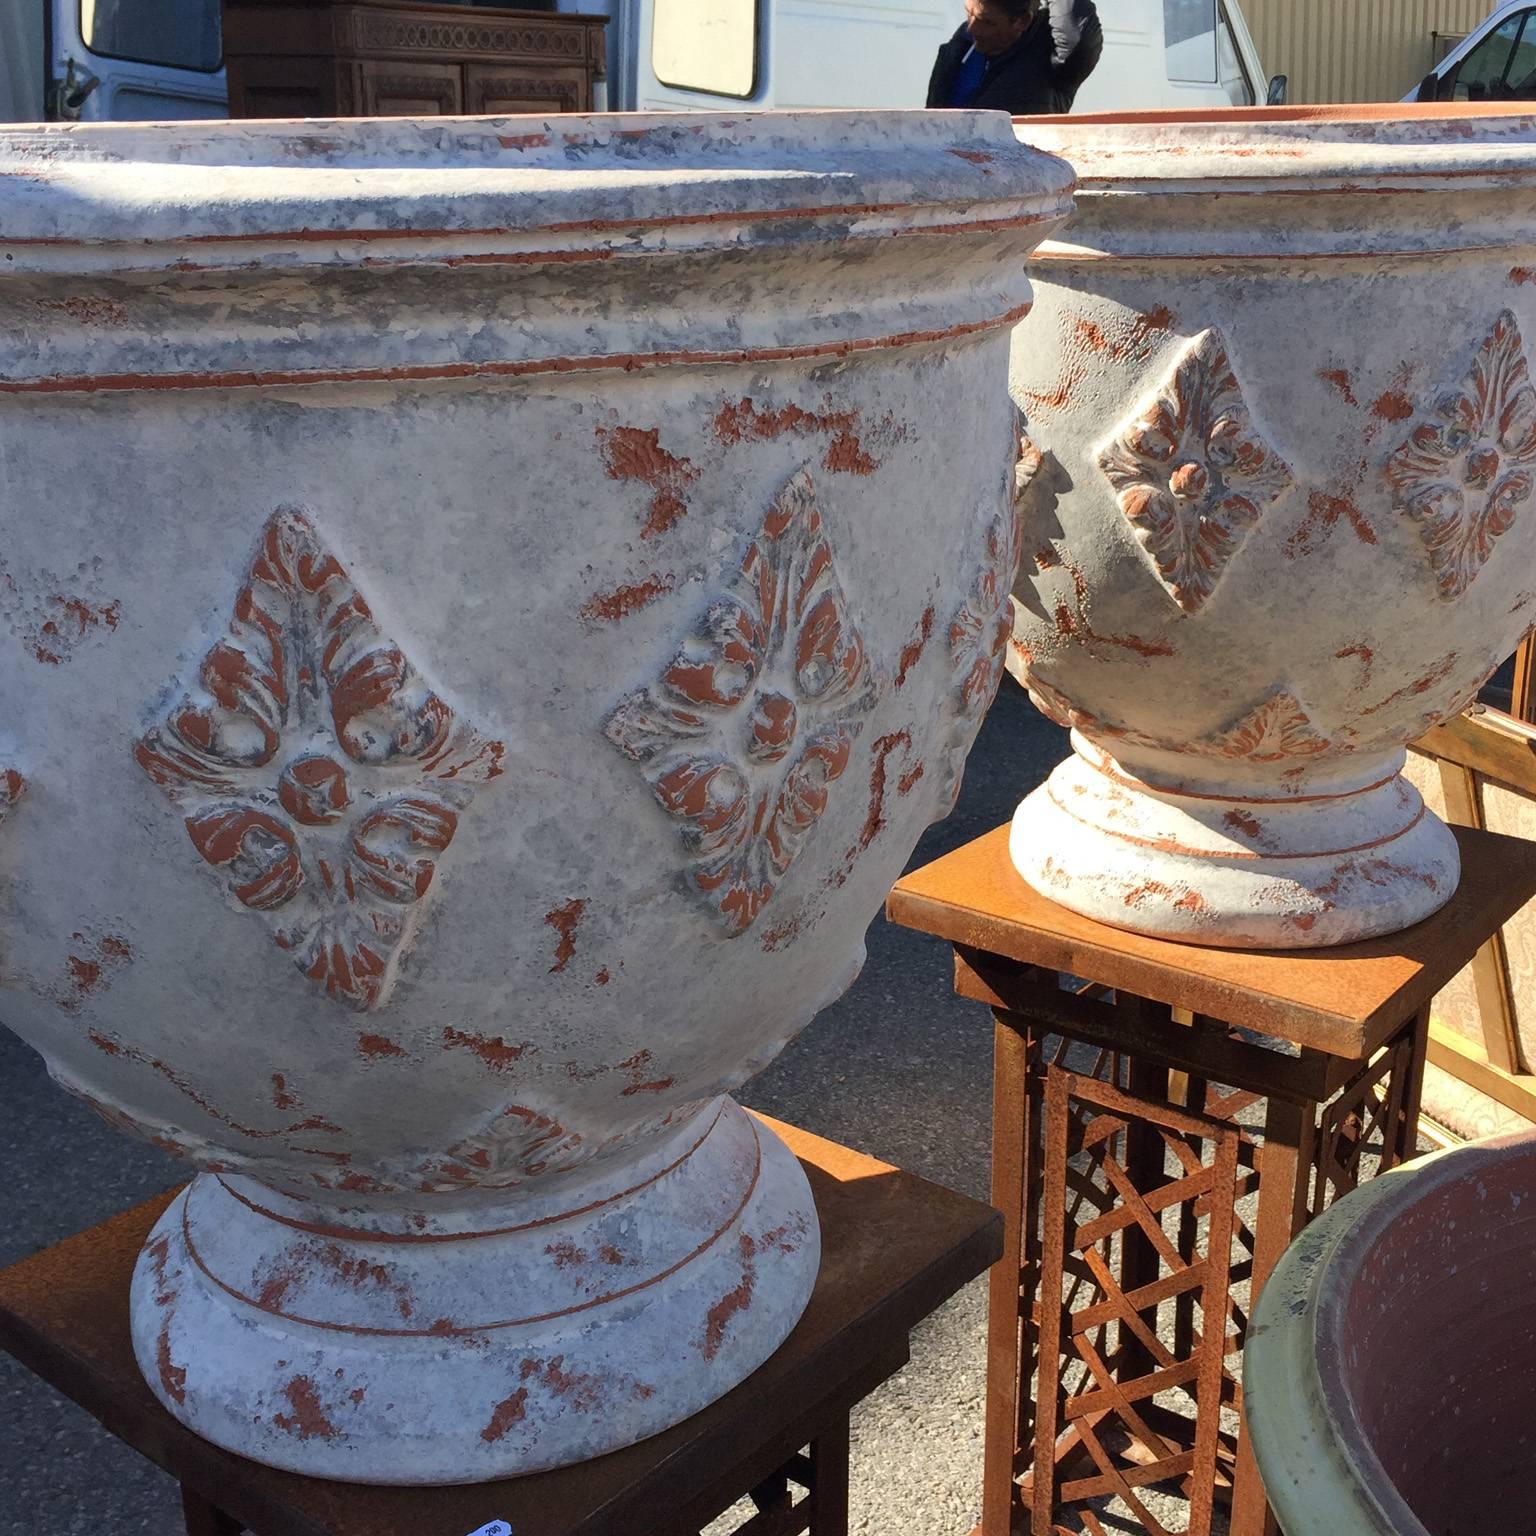 A pair of beautiful anduze terracotta planters/urns crafted in the South of France by reputable artisans. The patina on these planters is absolutely stunning and unique, with hints of antiqued orange, grey and creams. Hand thrown, modeled and